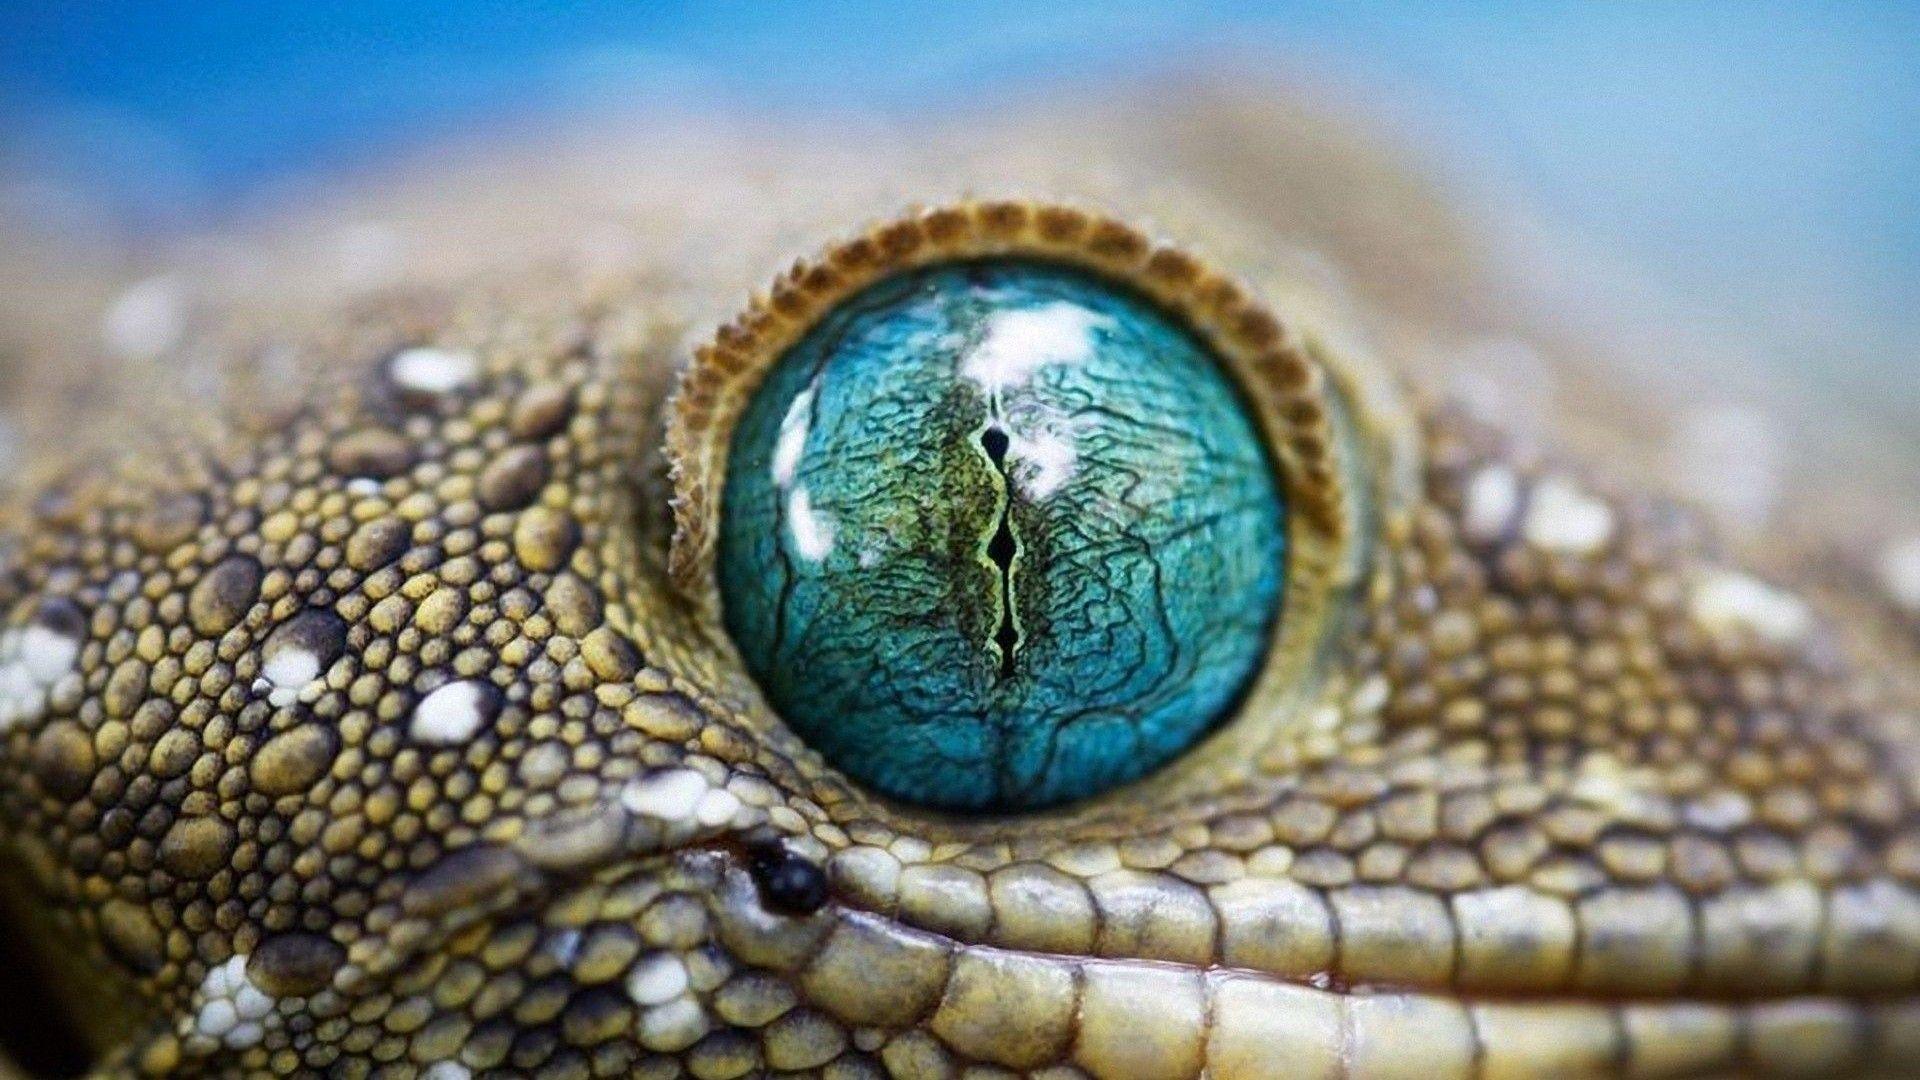 Reptile Eye Texture Wallpapers